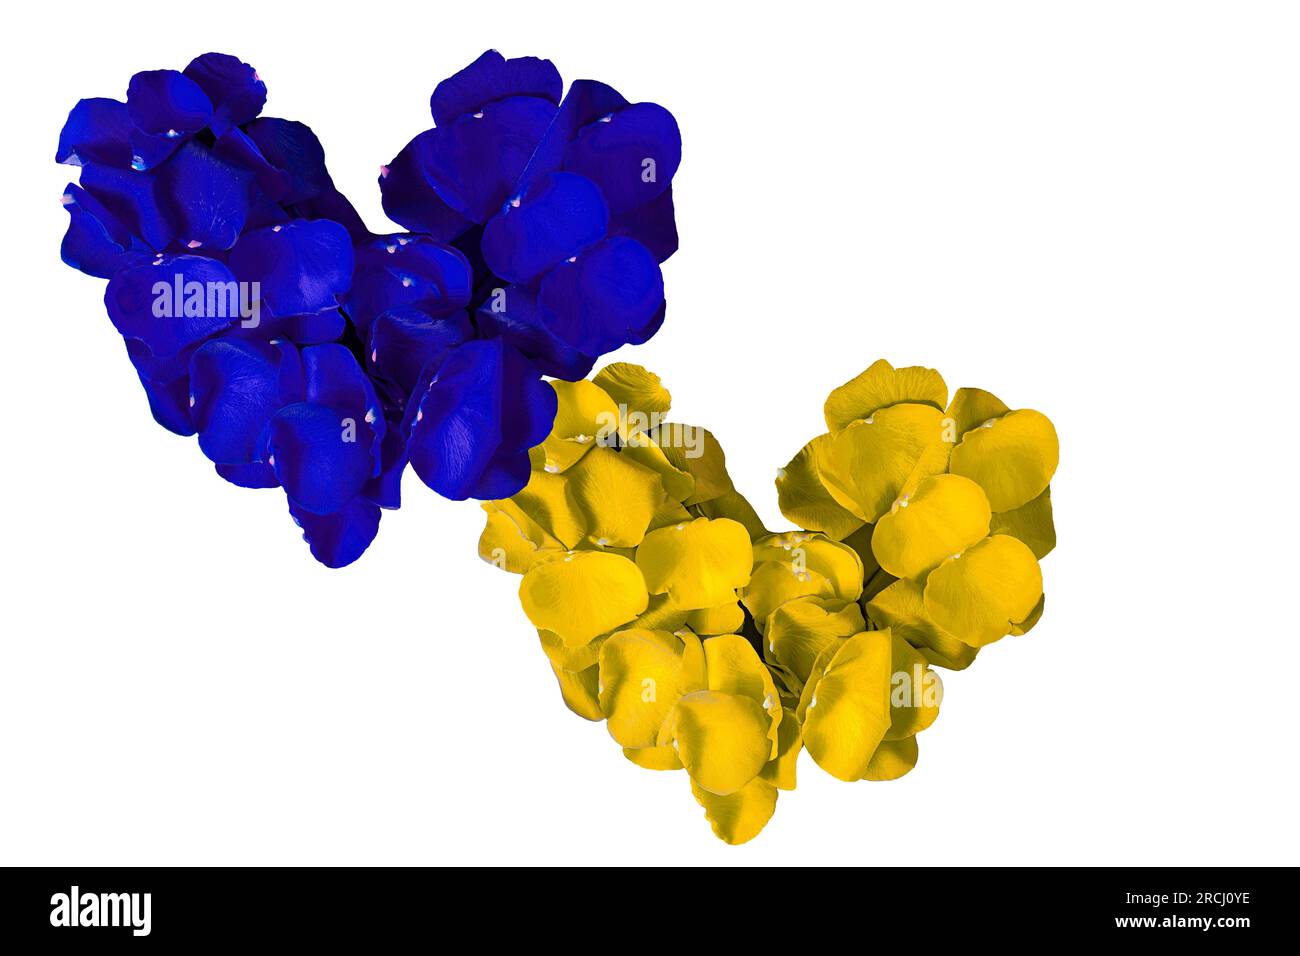 Hearts Made from Rose Petals in the Colors of the Ukrainian Flag. Heart Made of Blue and Yellow Rose Petals Isolated on White Background. Stock Photo